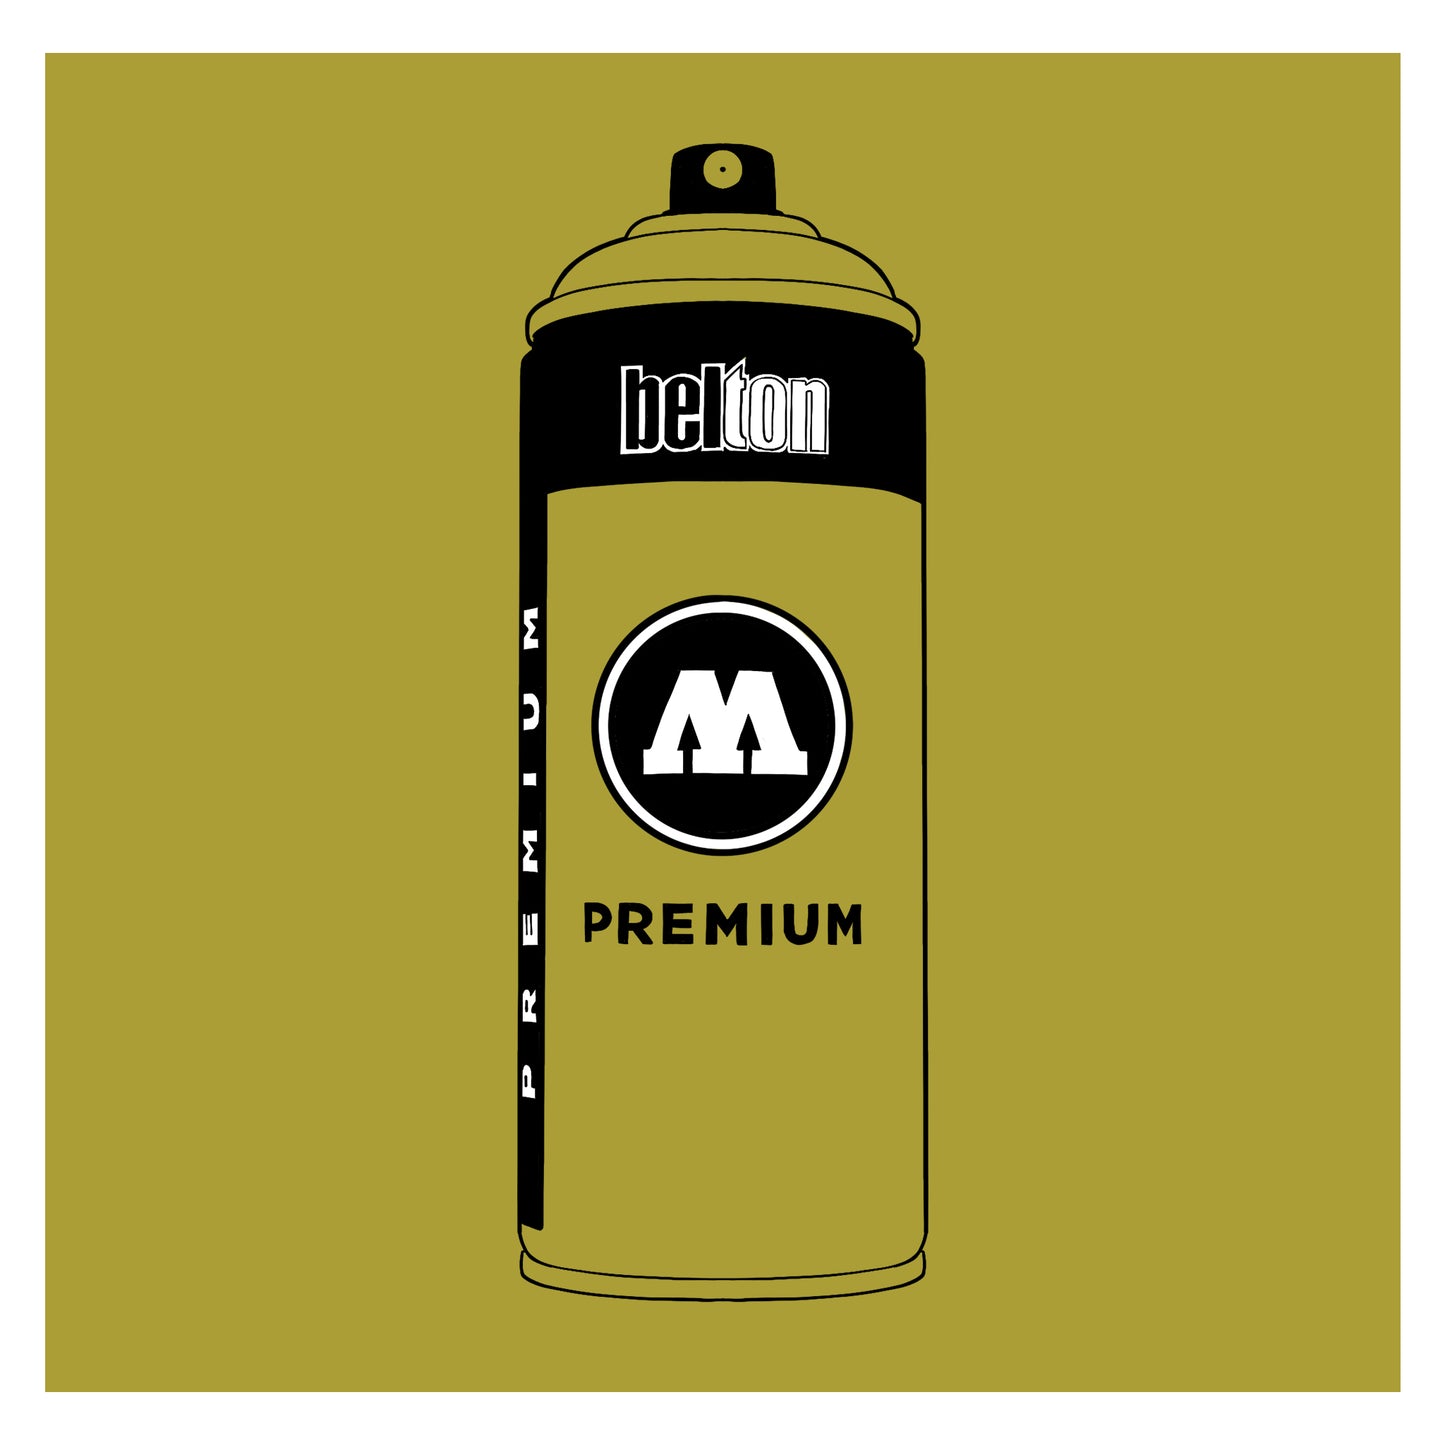 A black outline drawing of a pastel pea green spray paint can with the words "belton","premium" and the letter"M" written on the face in black and white font. The background is a color swatch of the same pea green with a white border